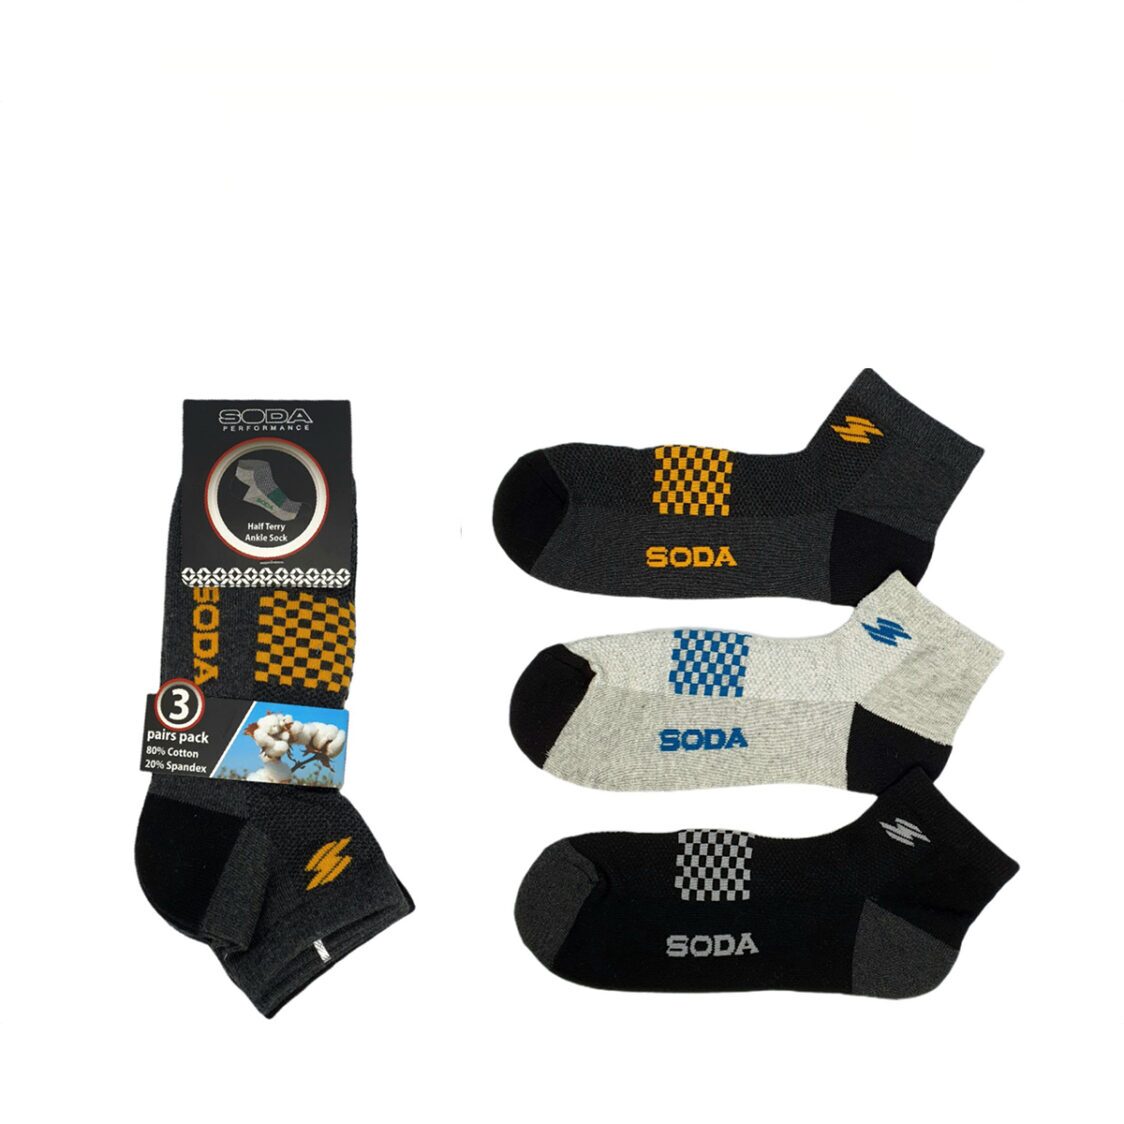 Soda 3 pc Pack Half Terry Ankle Casual Socks